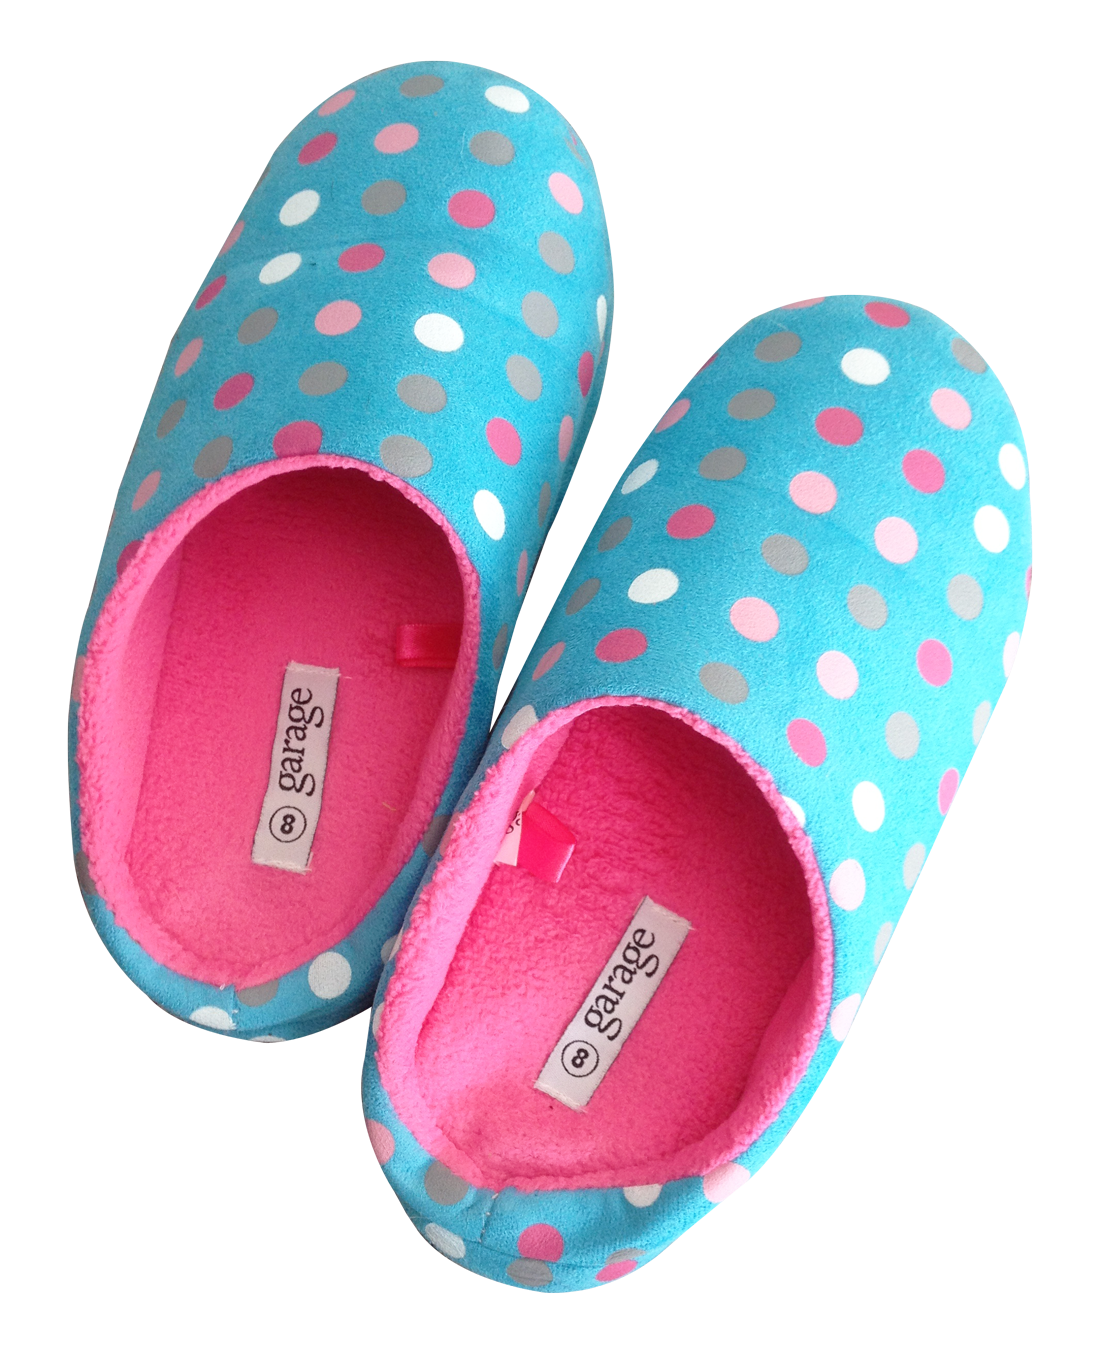 Teal Slippers Image